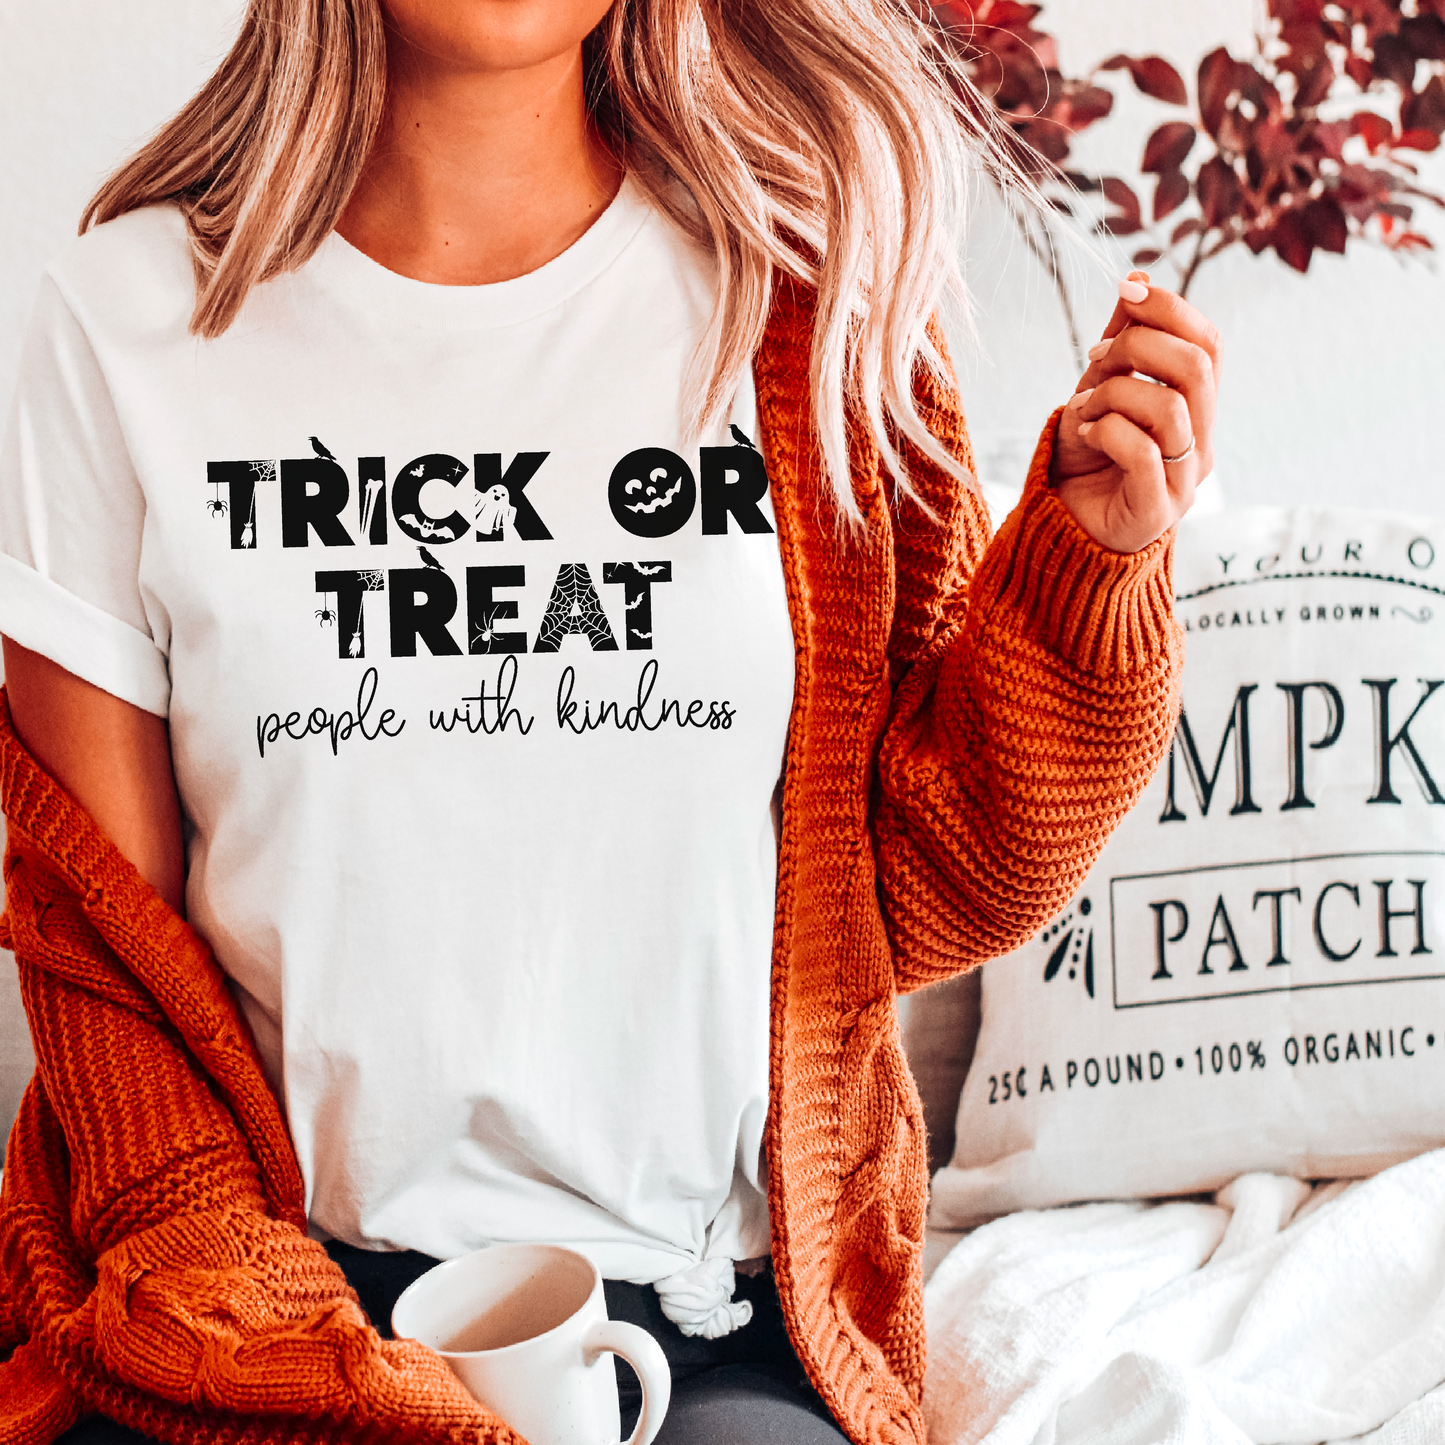 Trick or Treat People with Kindness Tee